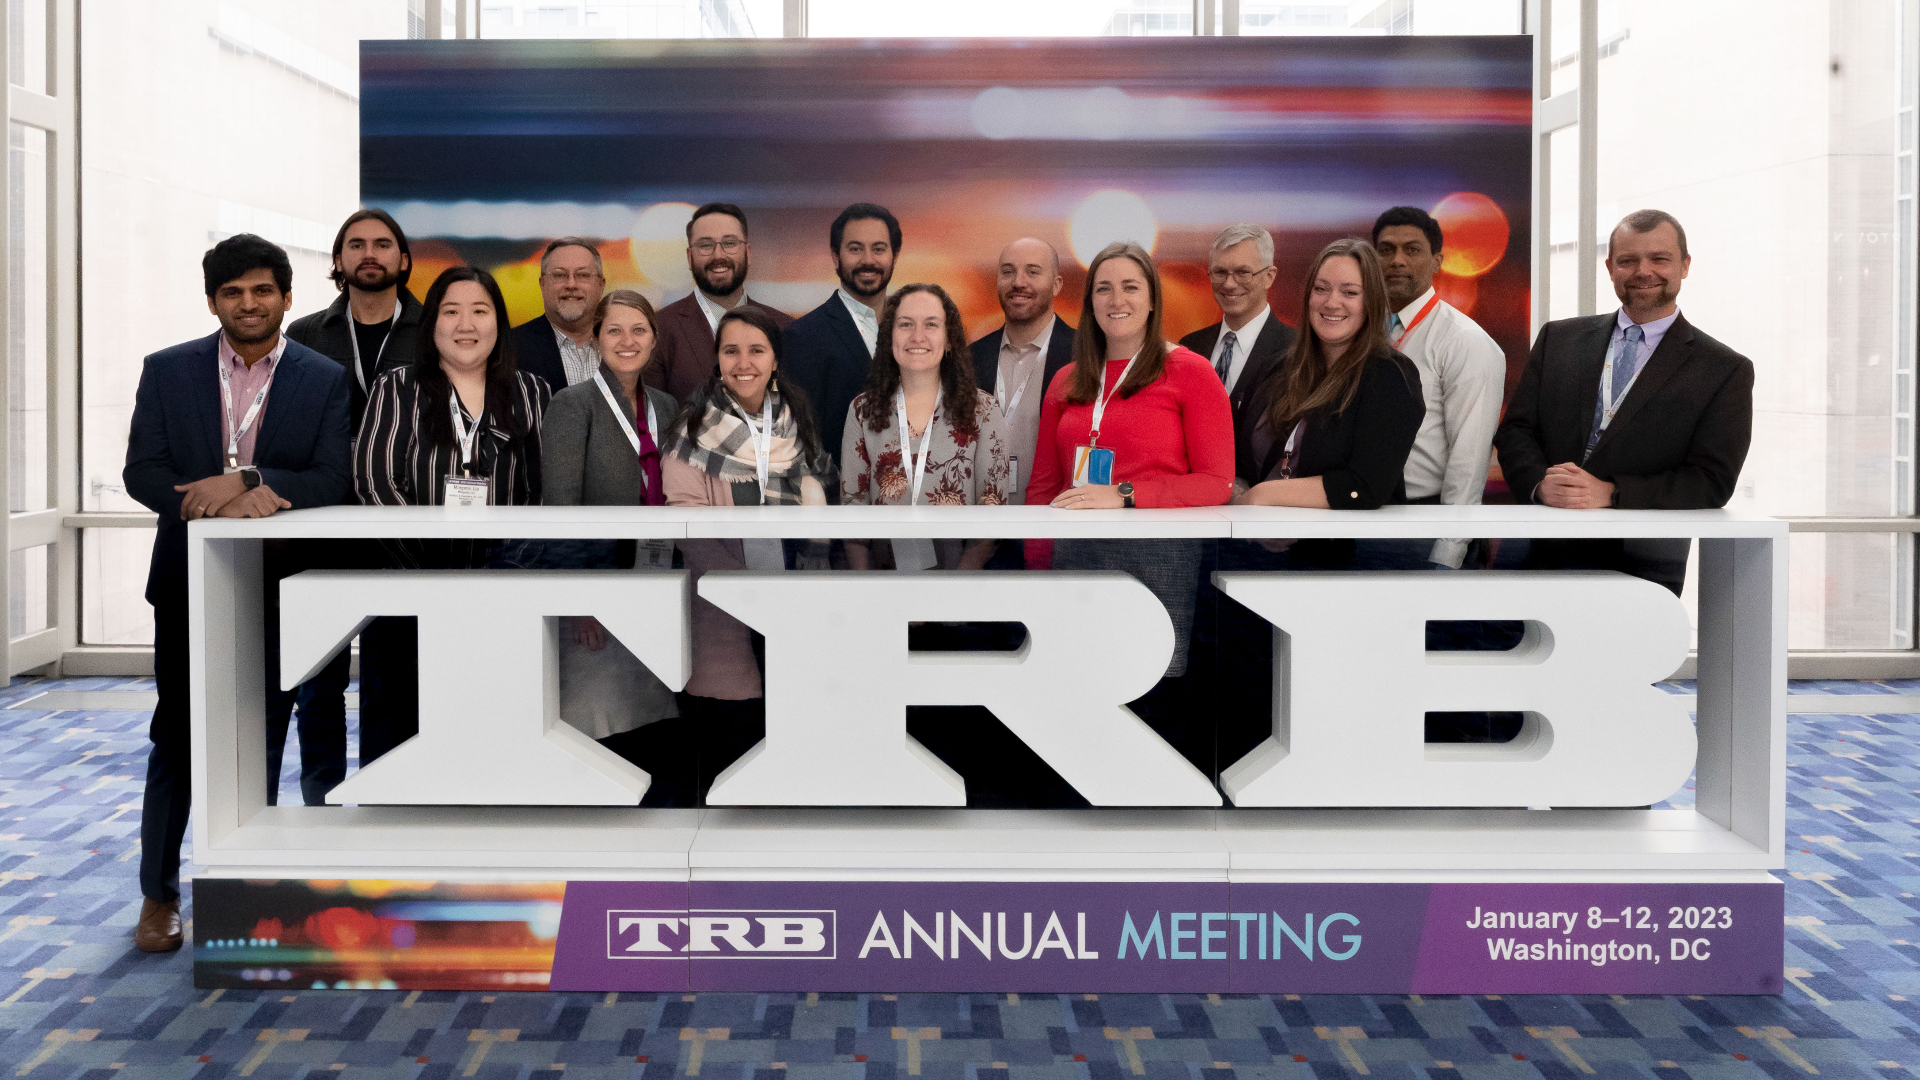 Kittelson staff at the 2023 TRB Annual Meeting